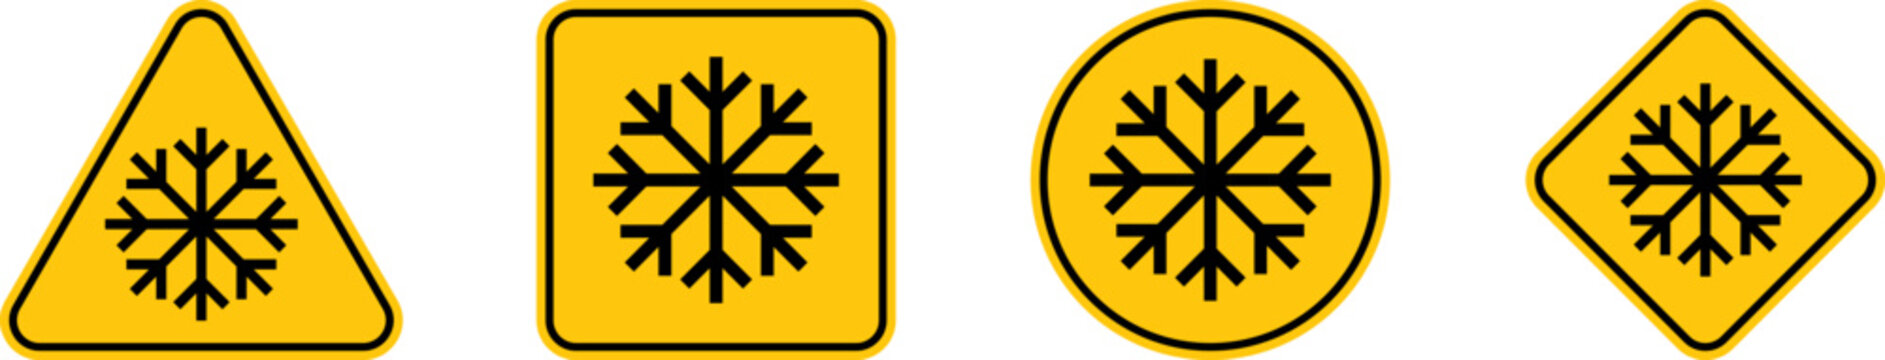 Sign Poison. Danger sign with skull. Toxic, electricity, Radioactive, CO2, EX, Magnet, radiation or chemical Warning icon. Danger Yellow triangle sign with skull and crossbones icon. Symbol of death.